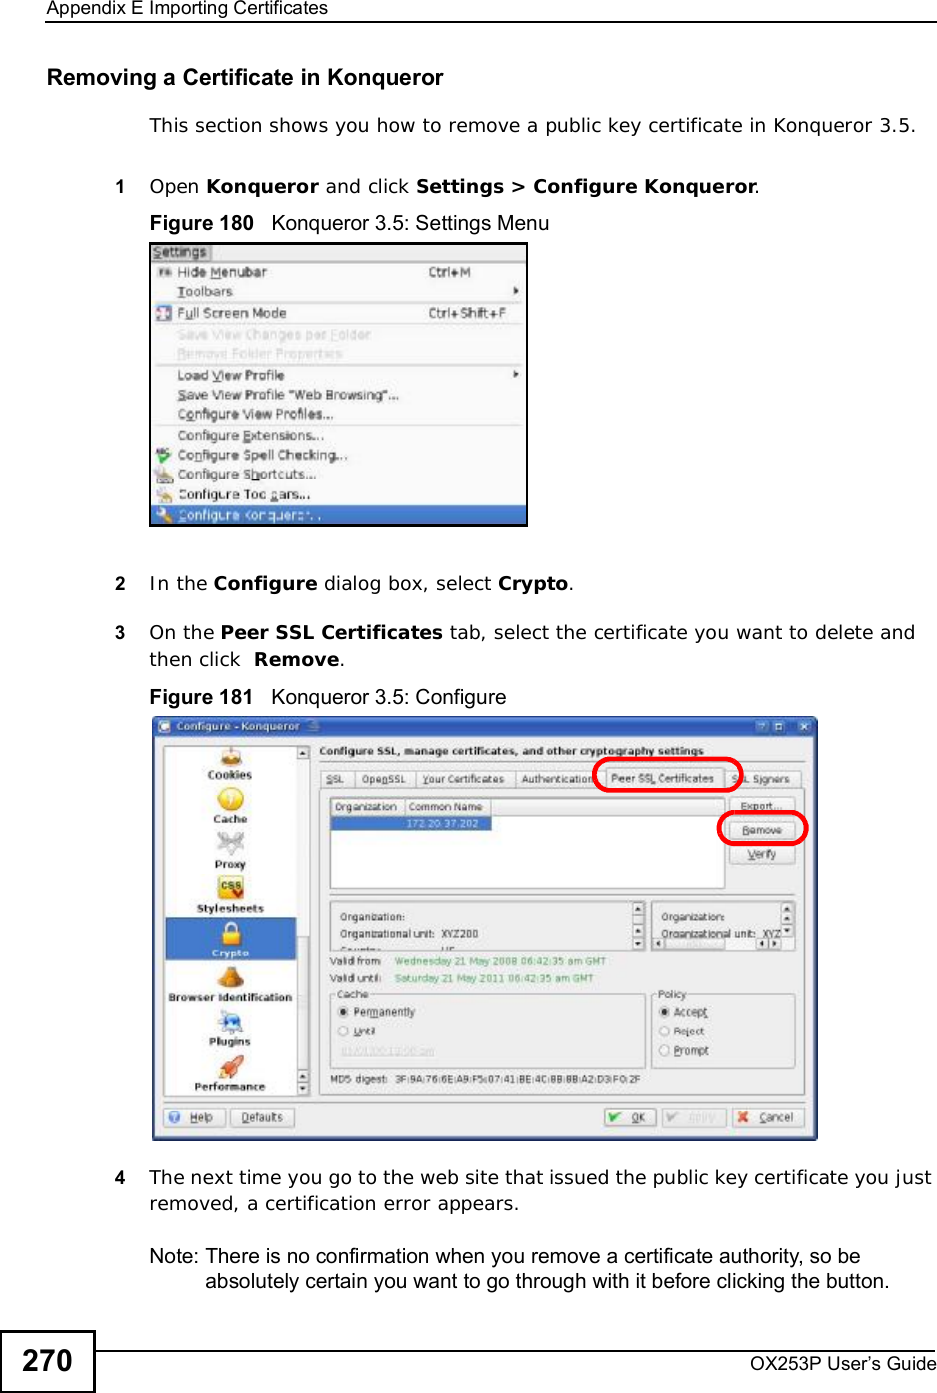 Appendix EImporting CertificatesOX253P User’s Guide270Removing a Certificate in KonquerorThis section shows you how to remove a public key certificate in Konqueror 3.5.1Open Konqueror and click Settings &gt; Configure Konqueror.Figure 180   Konqueror 3.5: Settings Menu2In the Configure dialog box, select Crypto.3On the Peer SSL Certificates tab, select the certificate you want to delete and then click  Remove.Figure 181   Konqueror 3.5: Configure4The next time you go to the web site that issued the public key certificate you just removed, a certification error appears.Note: There is no confirmation when you remove a certificate authority, so be absolutely certain you want to go through with it before clicking the button.